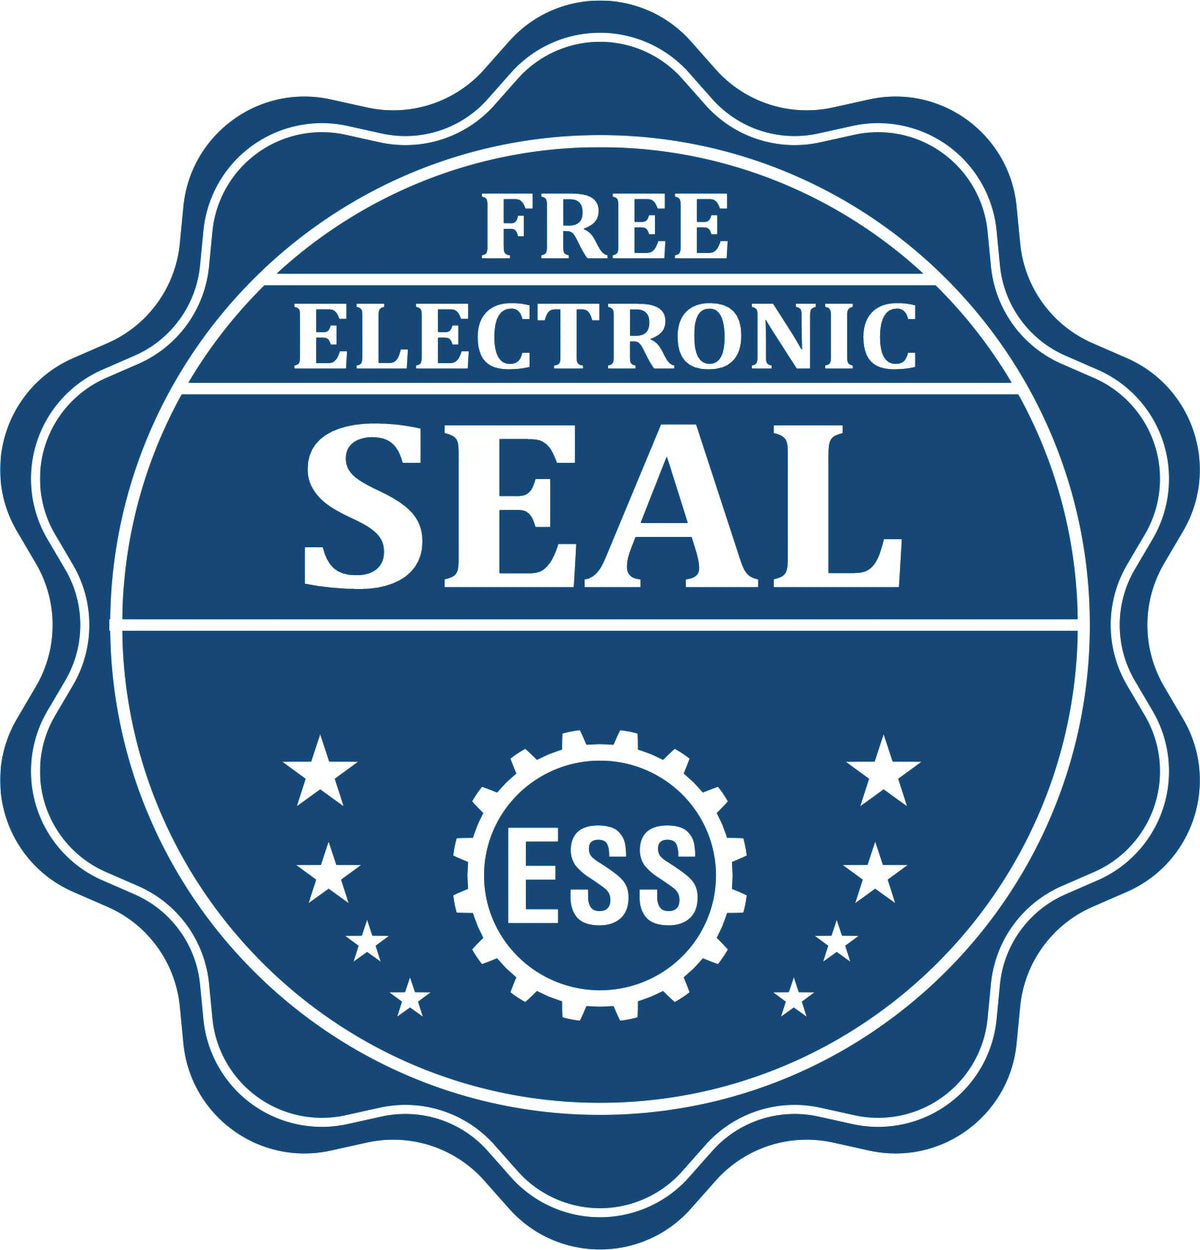 A badge showing a free electronic seal for the Slim Pre-Inked North Dakota Professional Engineer Seal Stamp with stars and the ESS gear on the emblem.